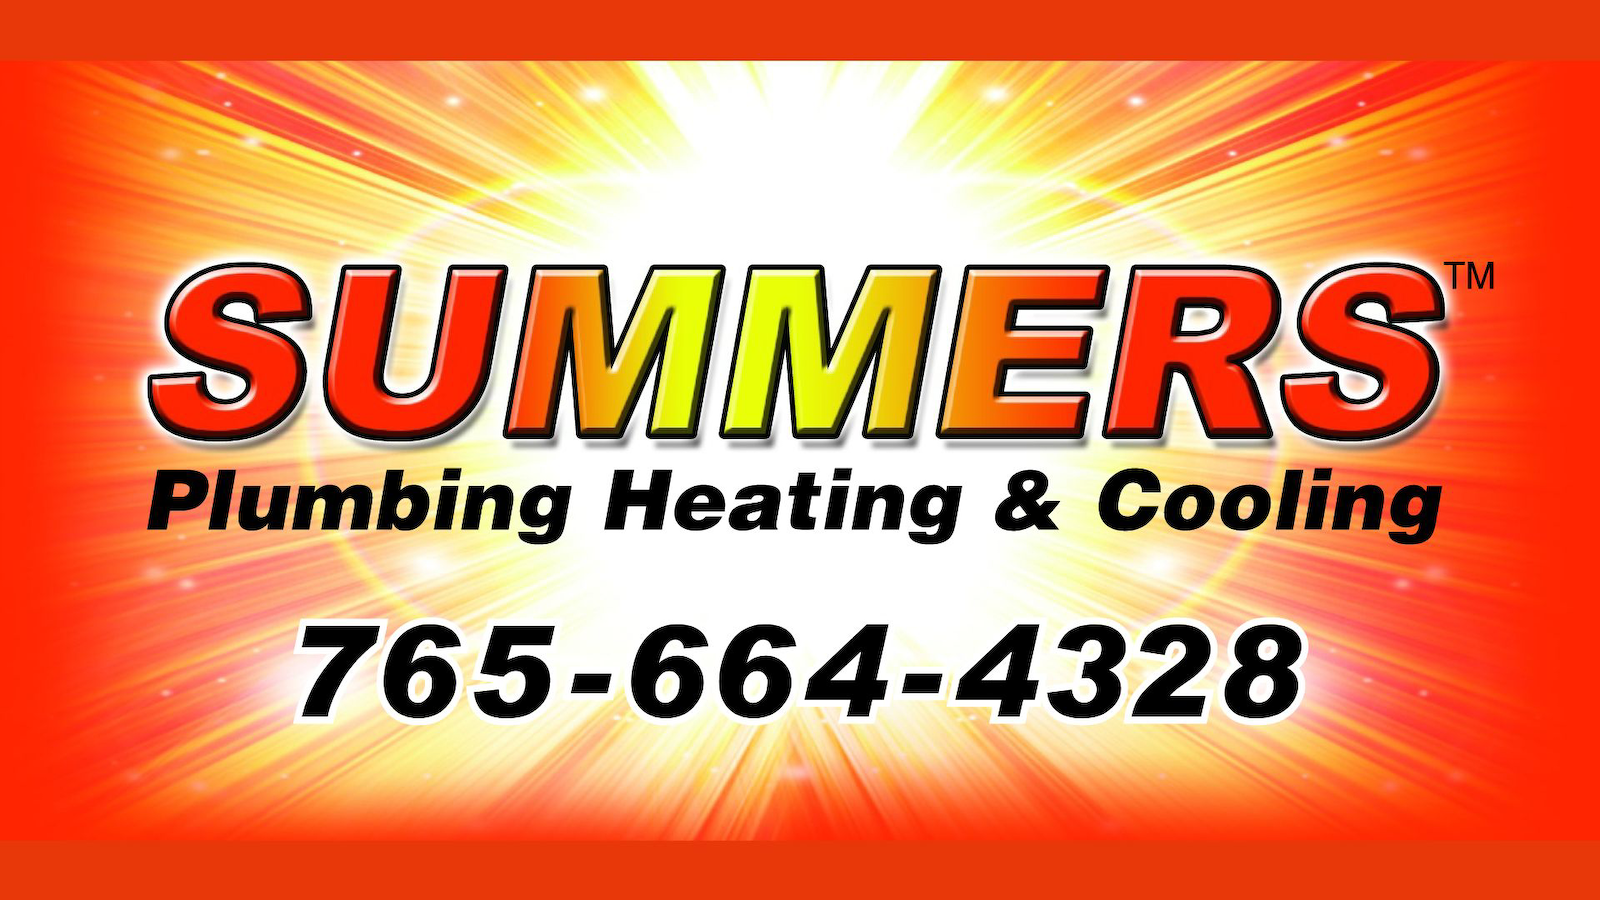 Summers Plumbing, Heating, and Cooling